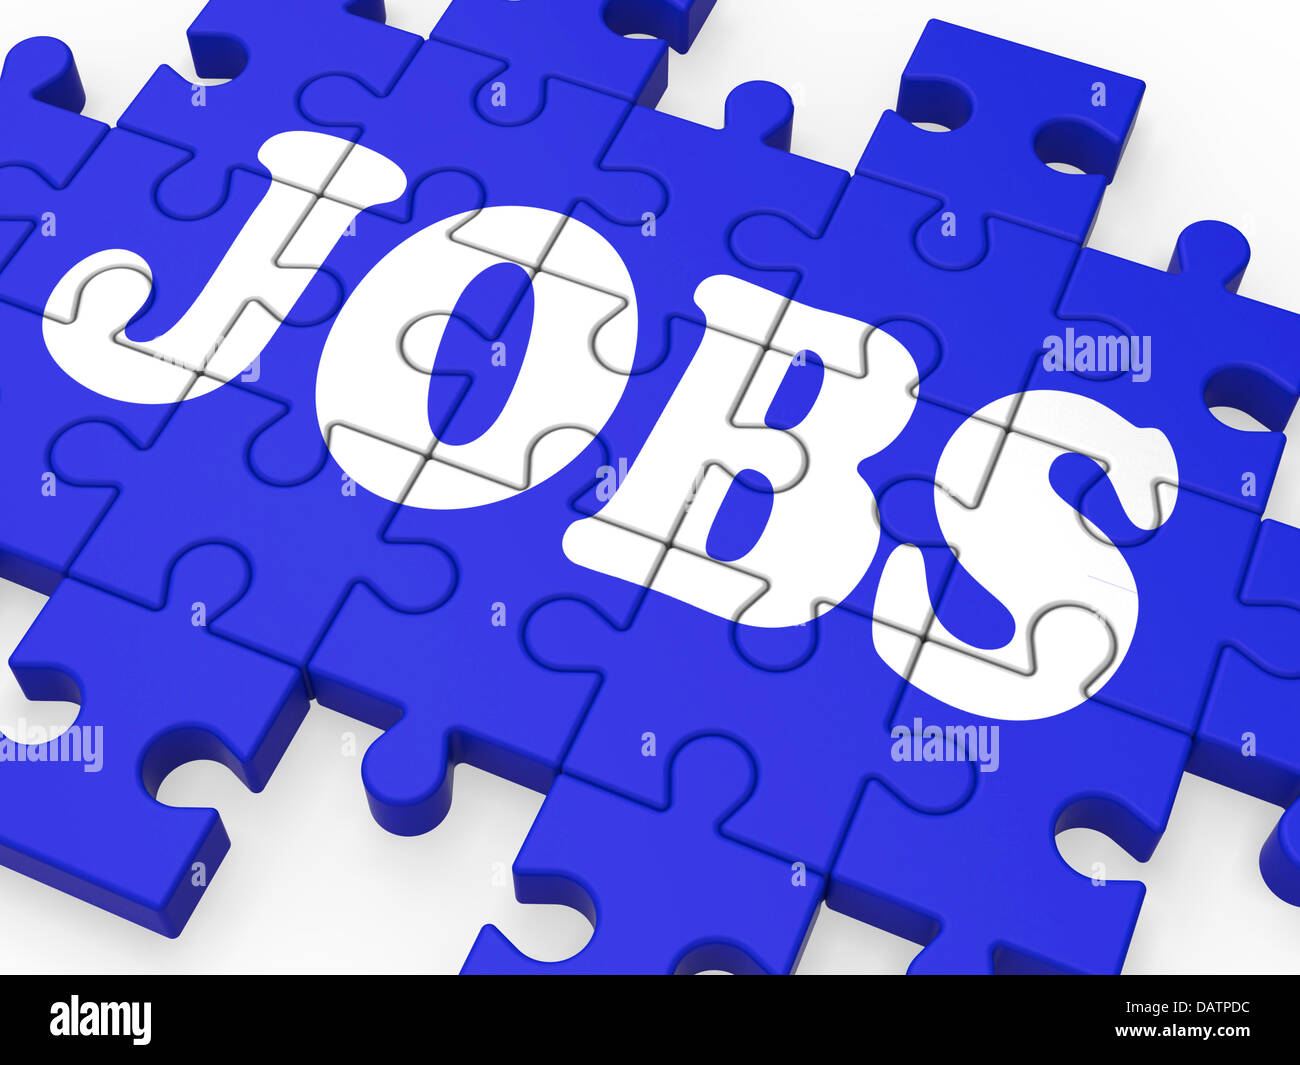 Jobs Puzzle Shows Careers And Employment Stock Photo